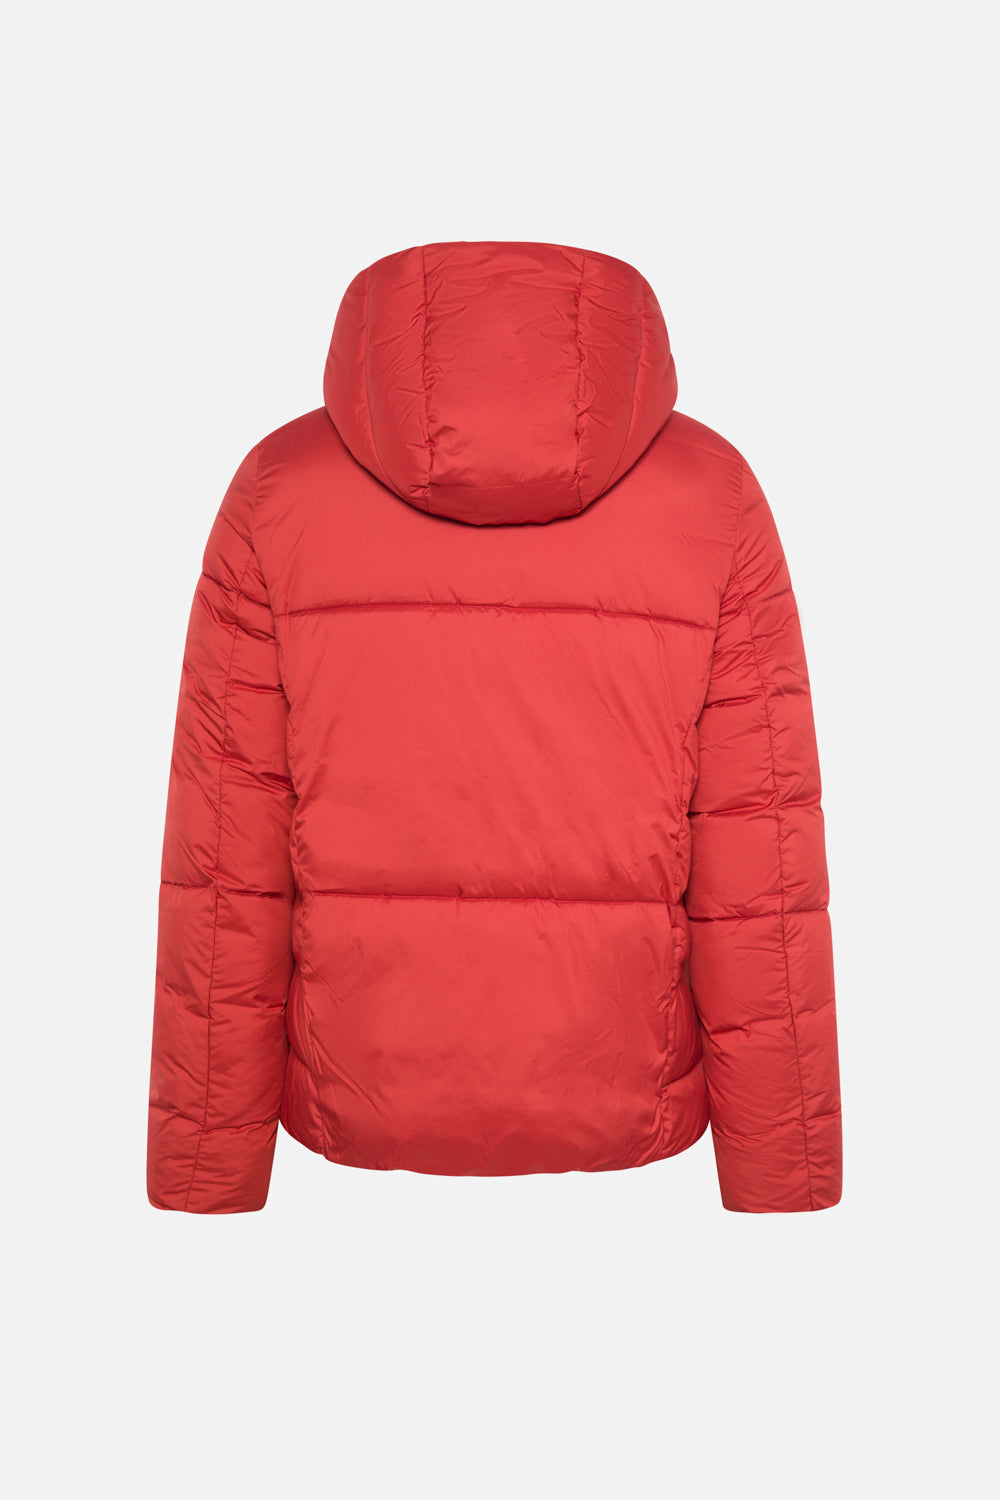 CHILLY RED HOXA JACKET